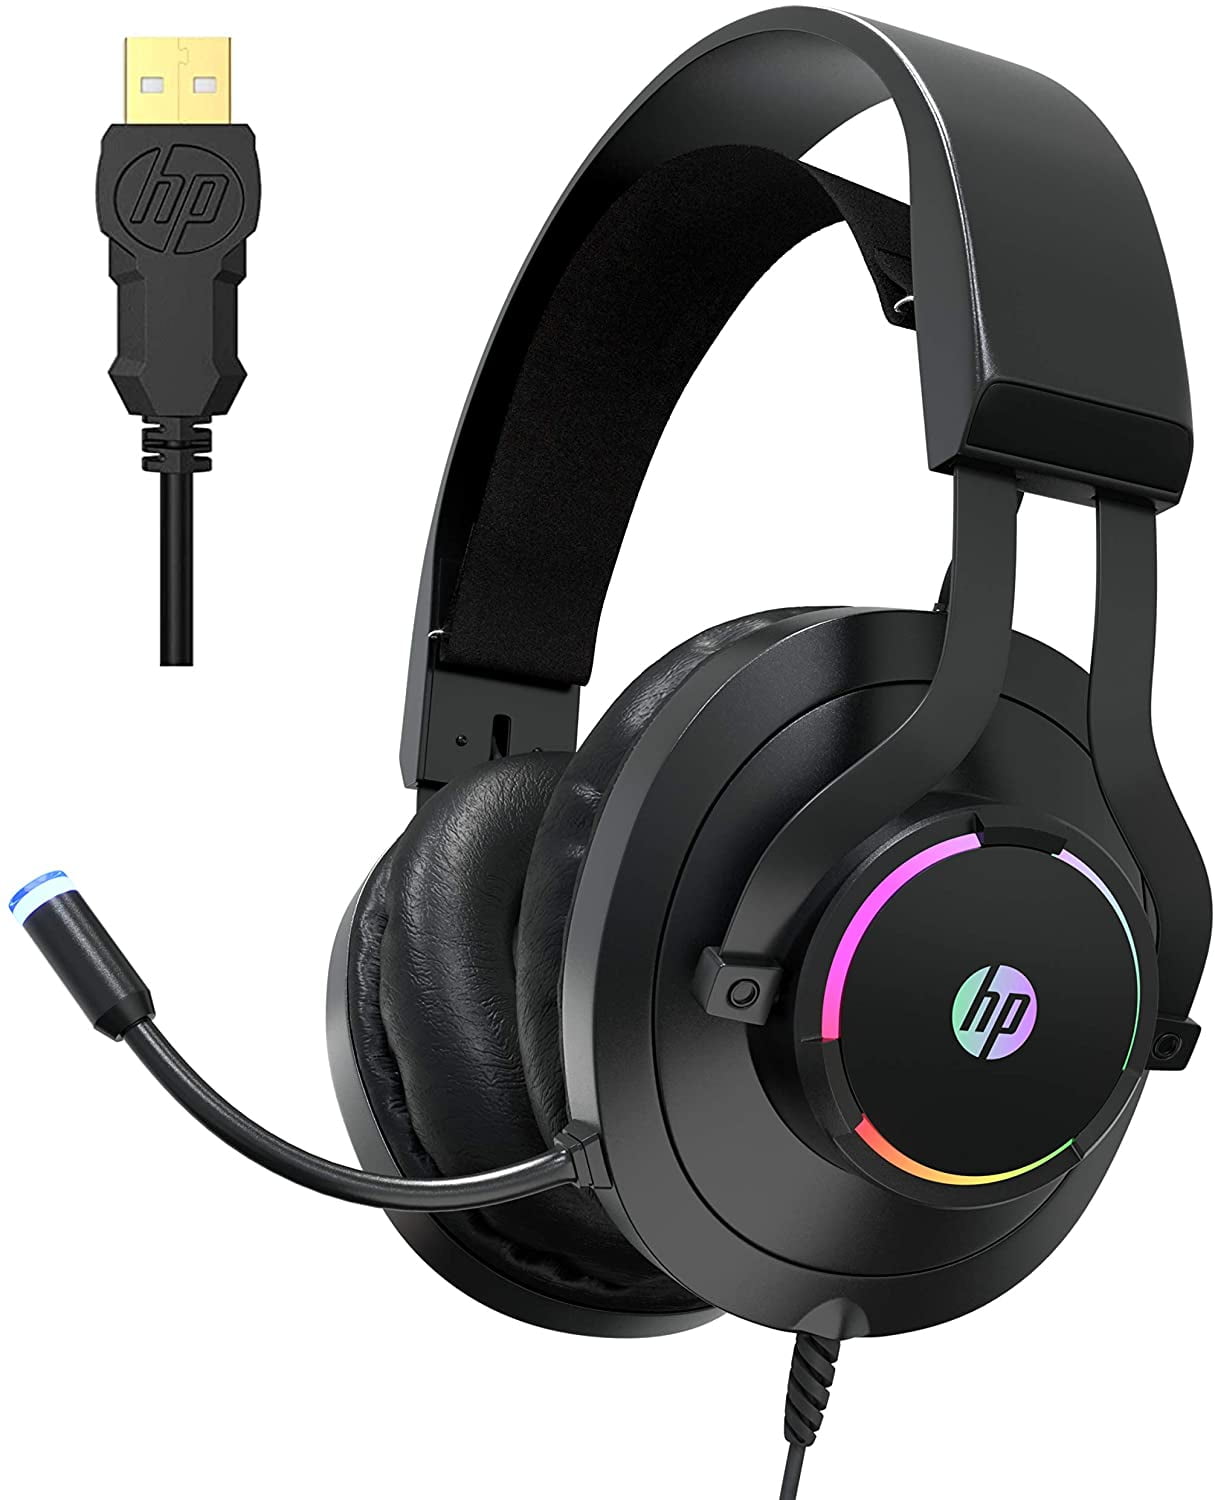 HP USB Computer Gaming Headset with Microphone 7.1 Surround Sound